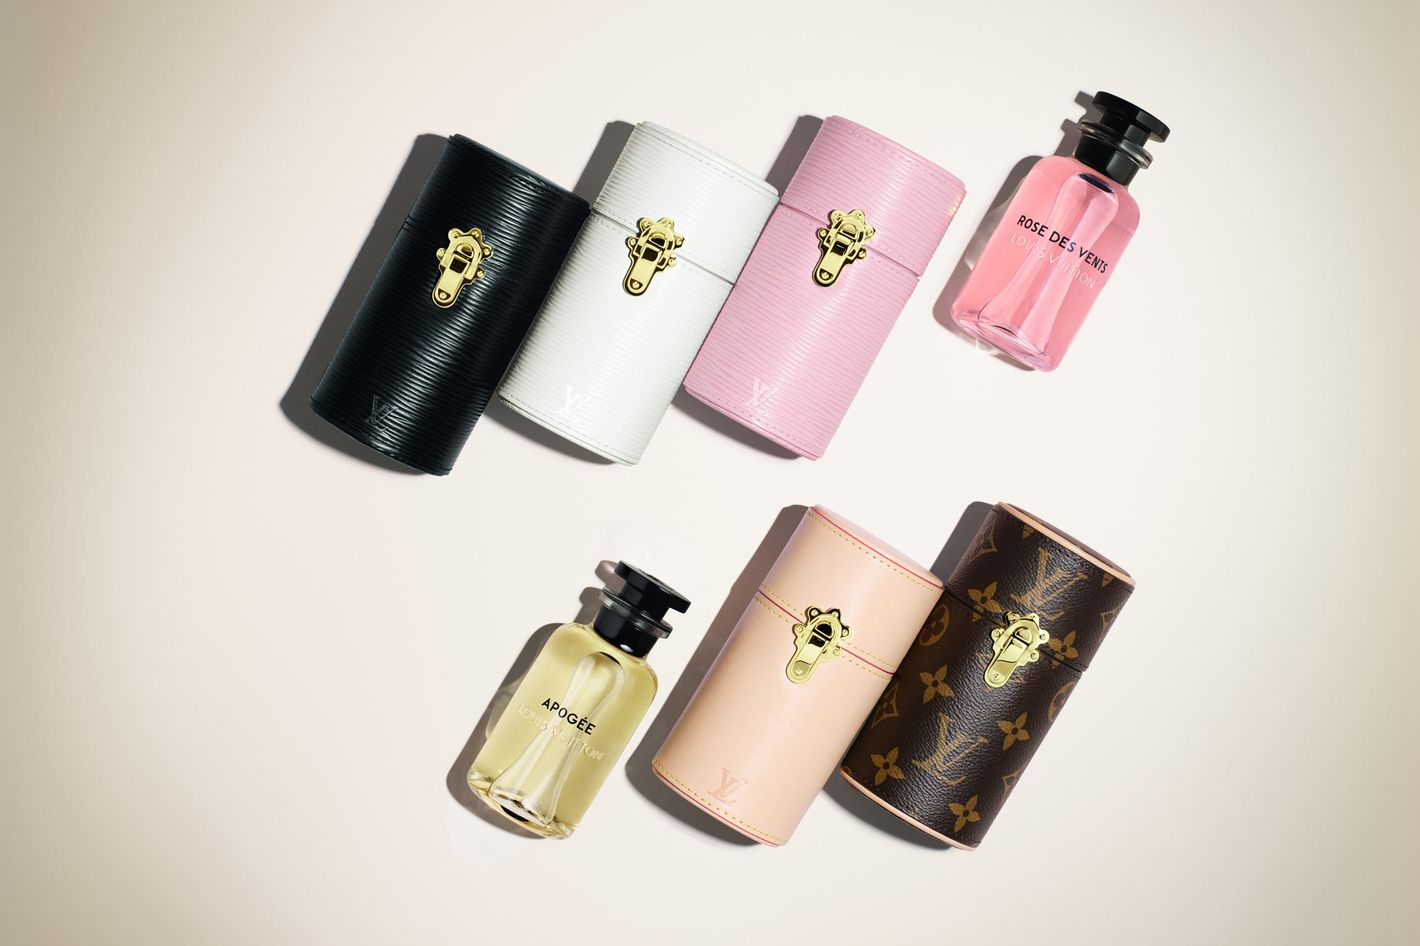 Louis Vuitton Invented an Accessory to Accompany Its Perfume